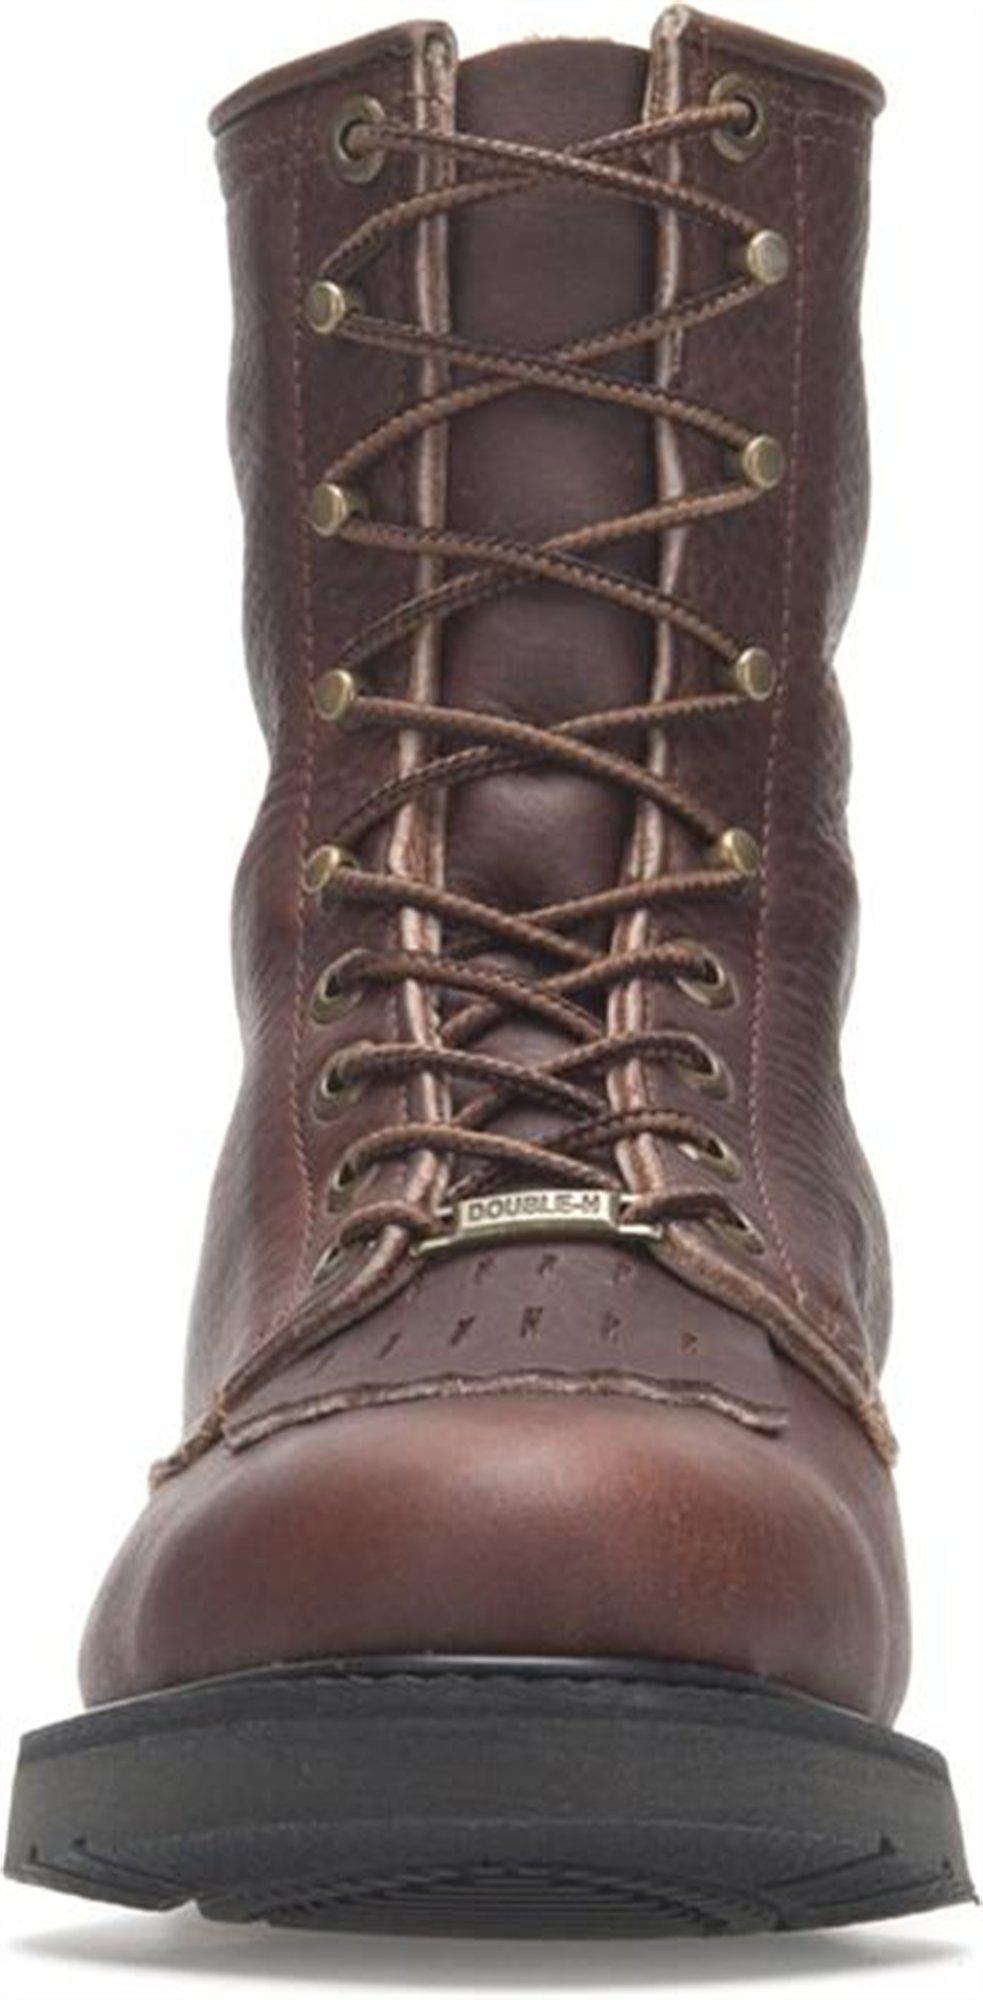 Double H Boot 8 Inch Work Lacer in 